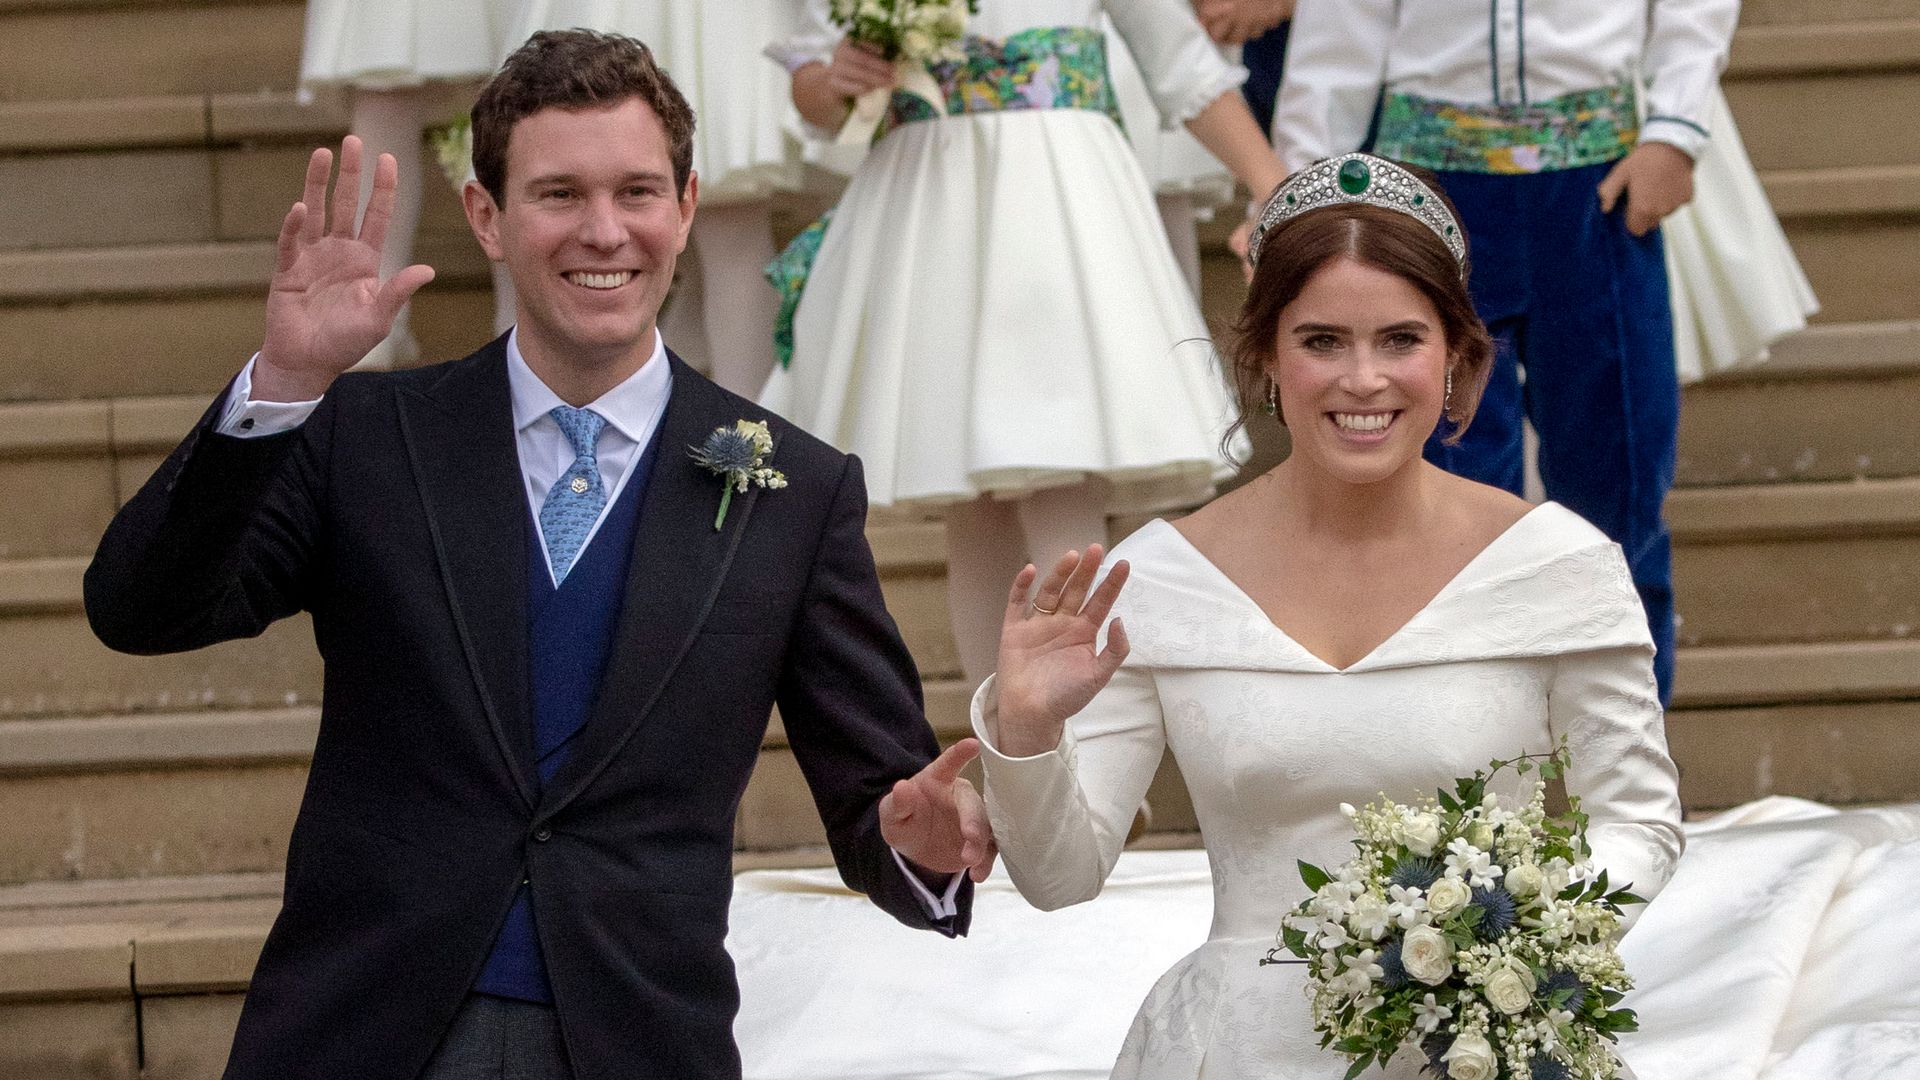 Princess Eugenie and Jack Brooksbank leave St George's Chapel in Windsor Castle following their wedding on October 12, 2018 in Windsor, England